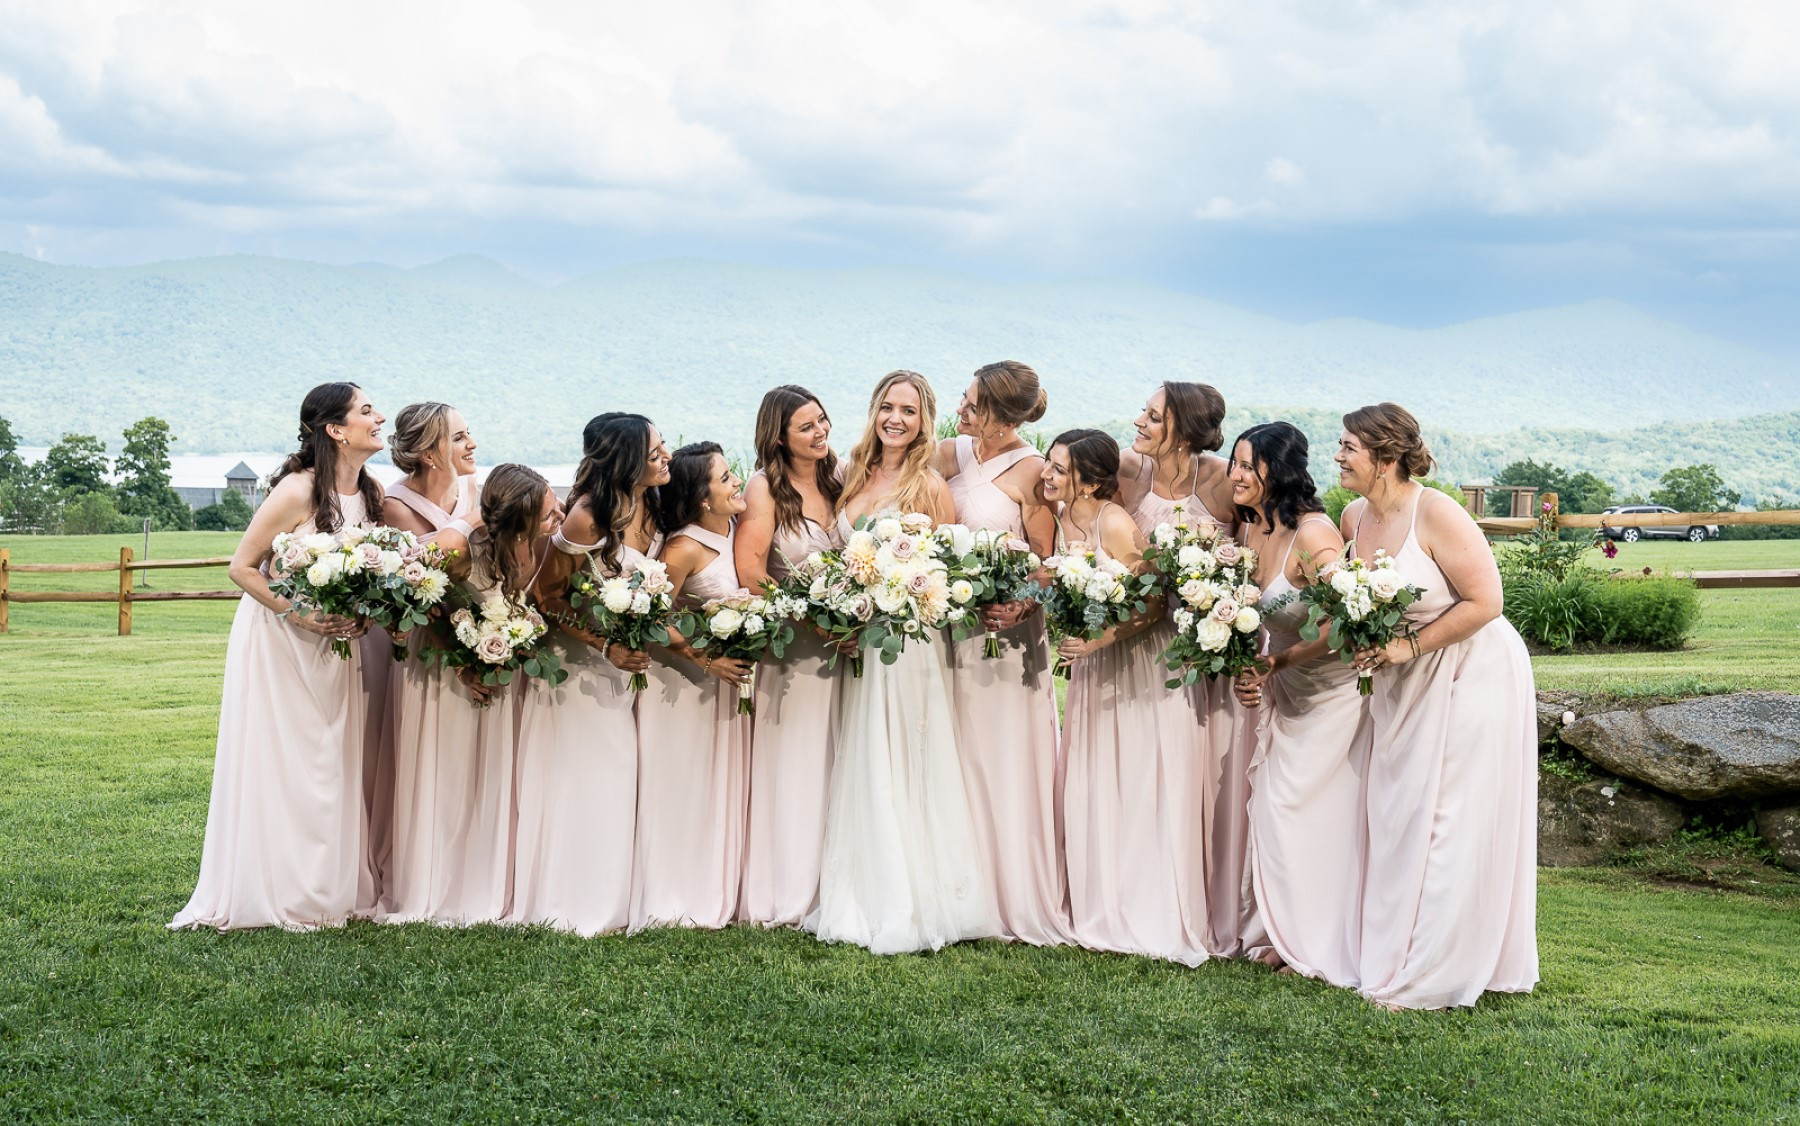 bride standing in middle with eleven bridesmaids in pink dresses all holding wedding bouquets.